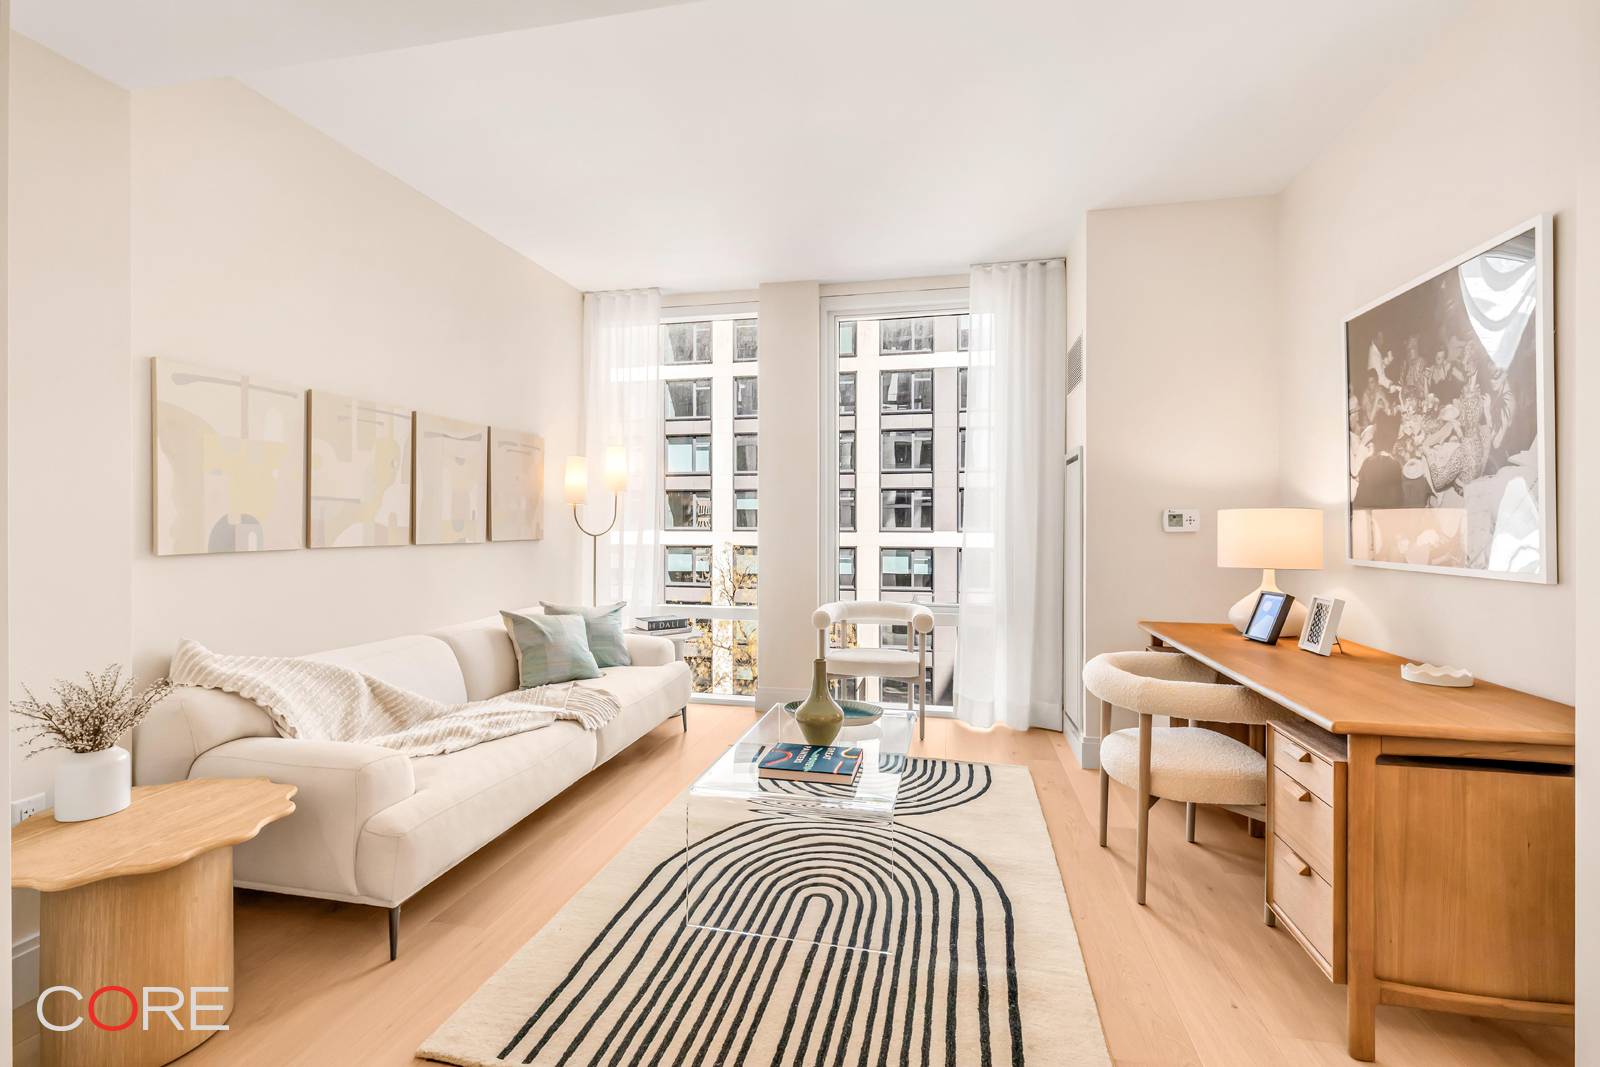 Private In Person amp ; Virtual Appointments Available Immediate Occupancy This generously proportioned 604 square foot studio boasts a thoughtfully designed layout that elevates studio living to new heights.